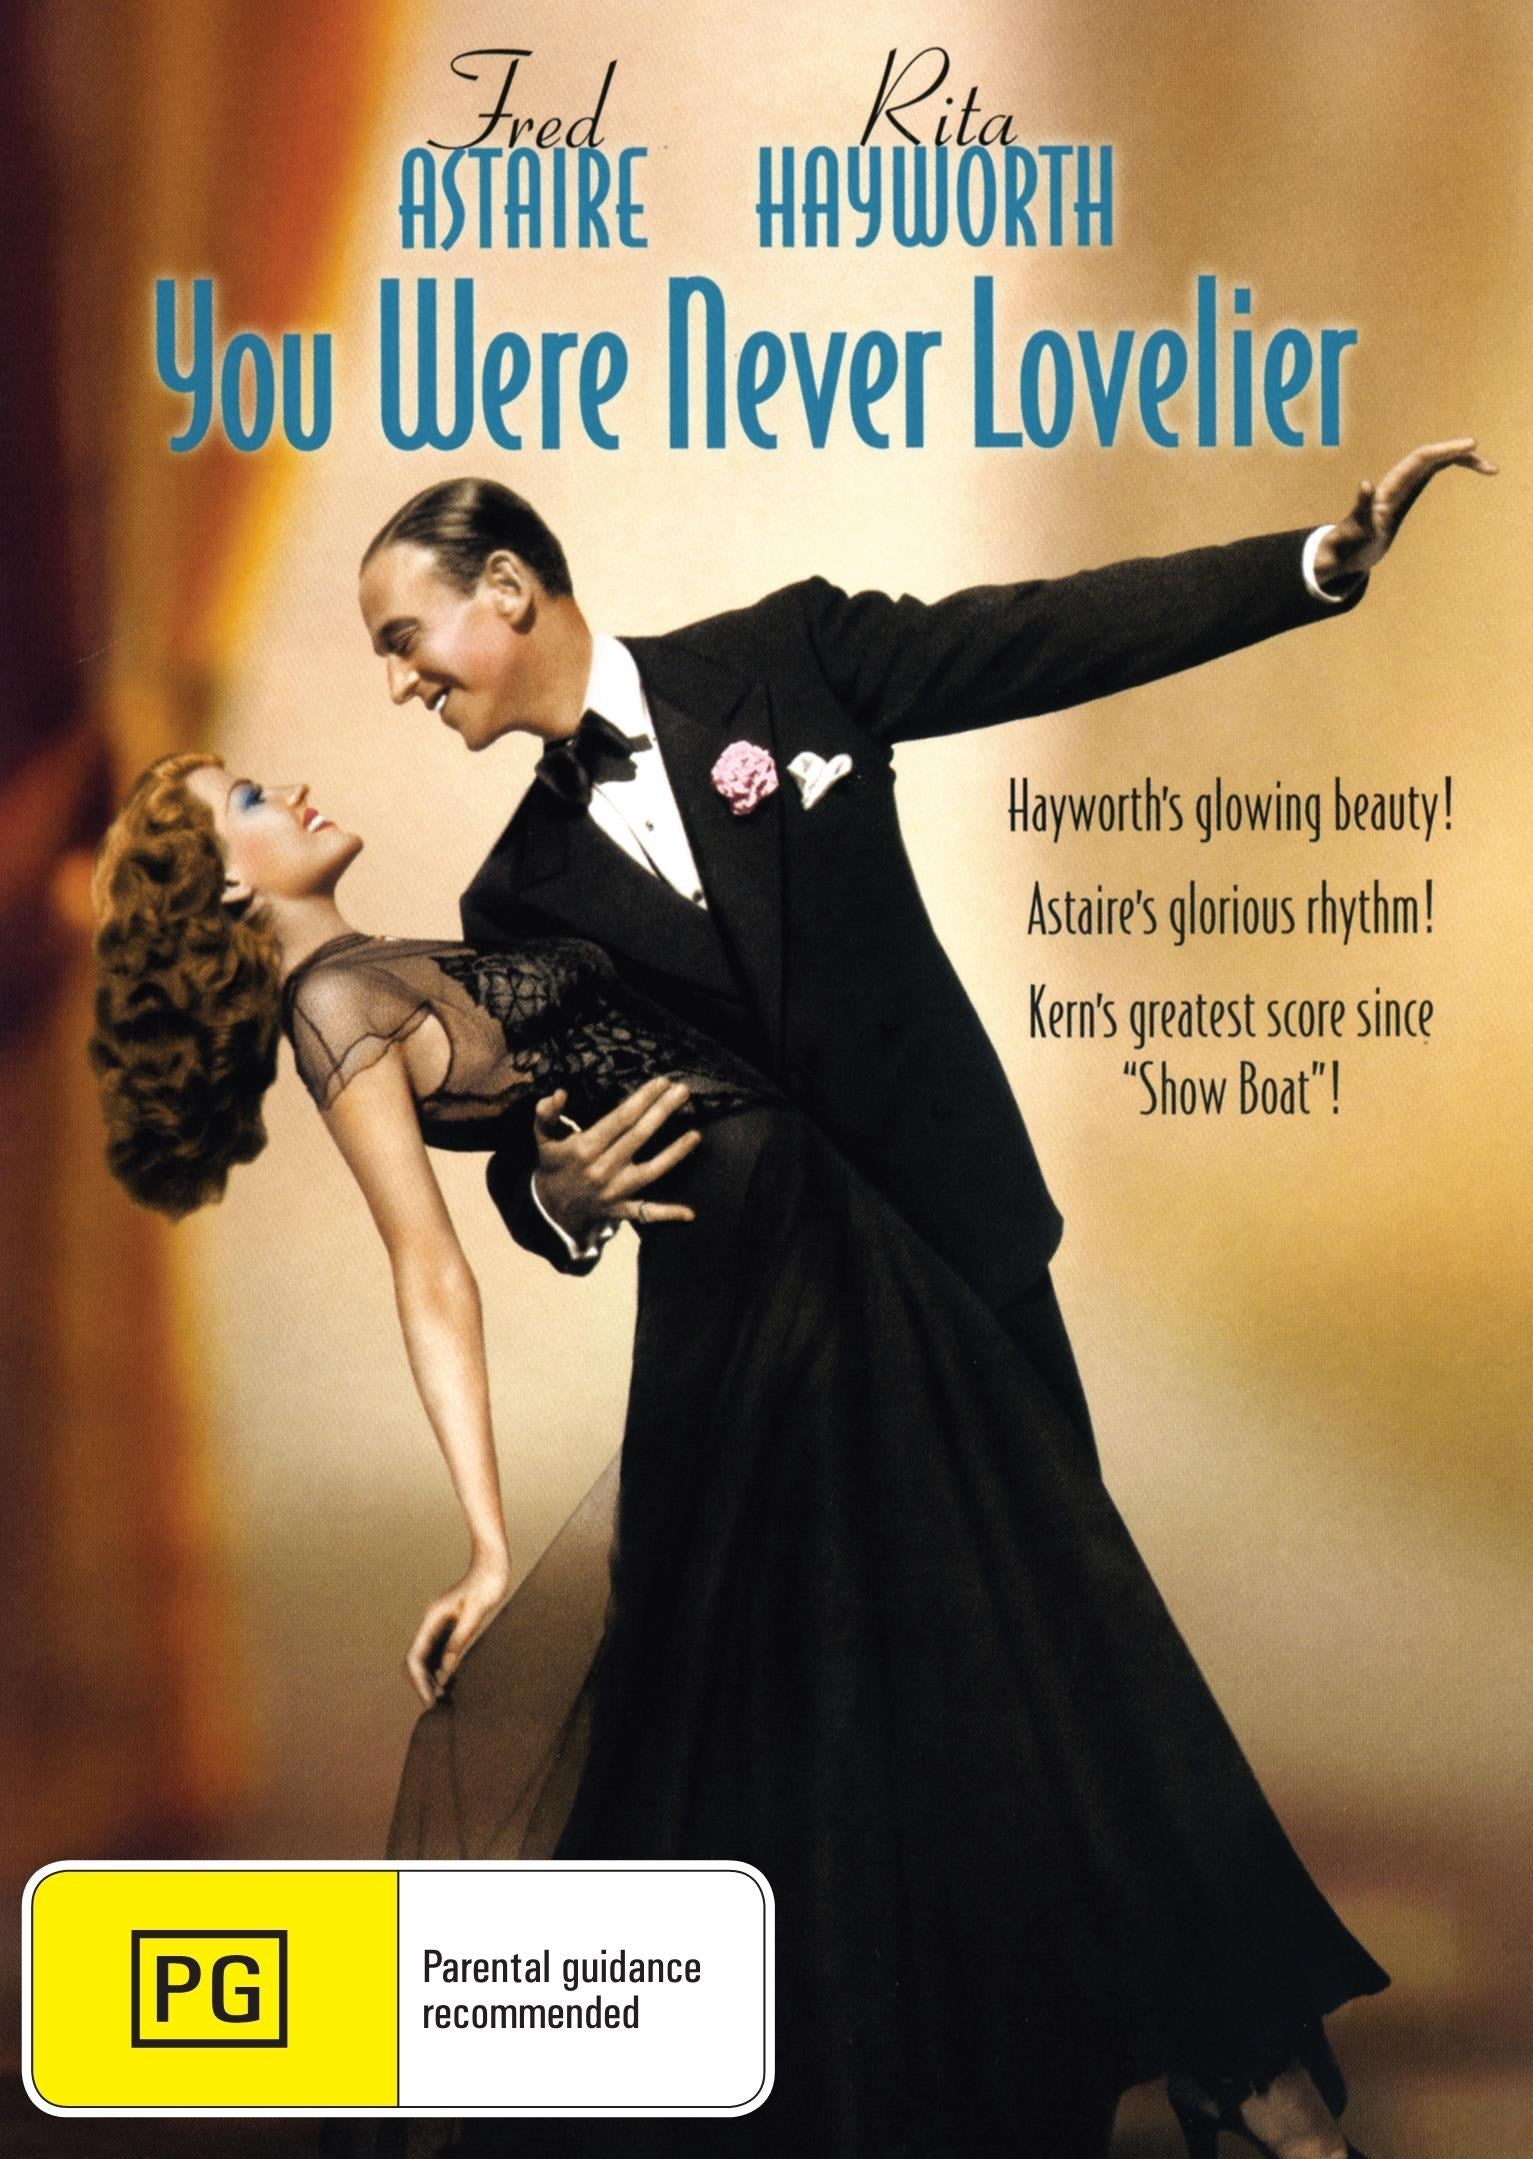 You Were Never Lovelier rareandcollectibledvds